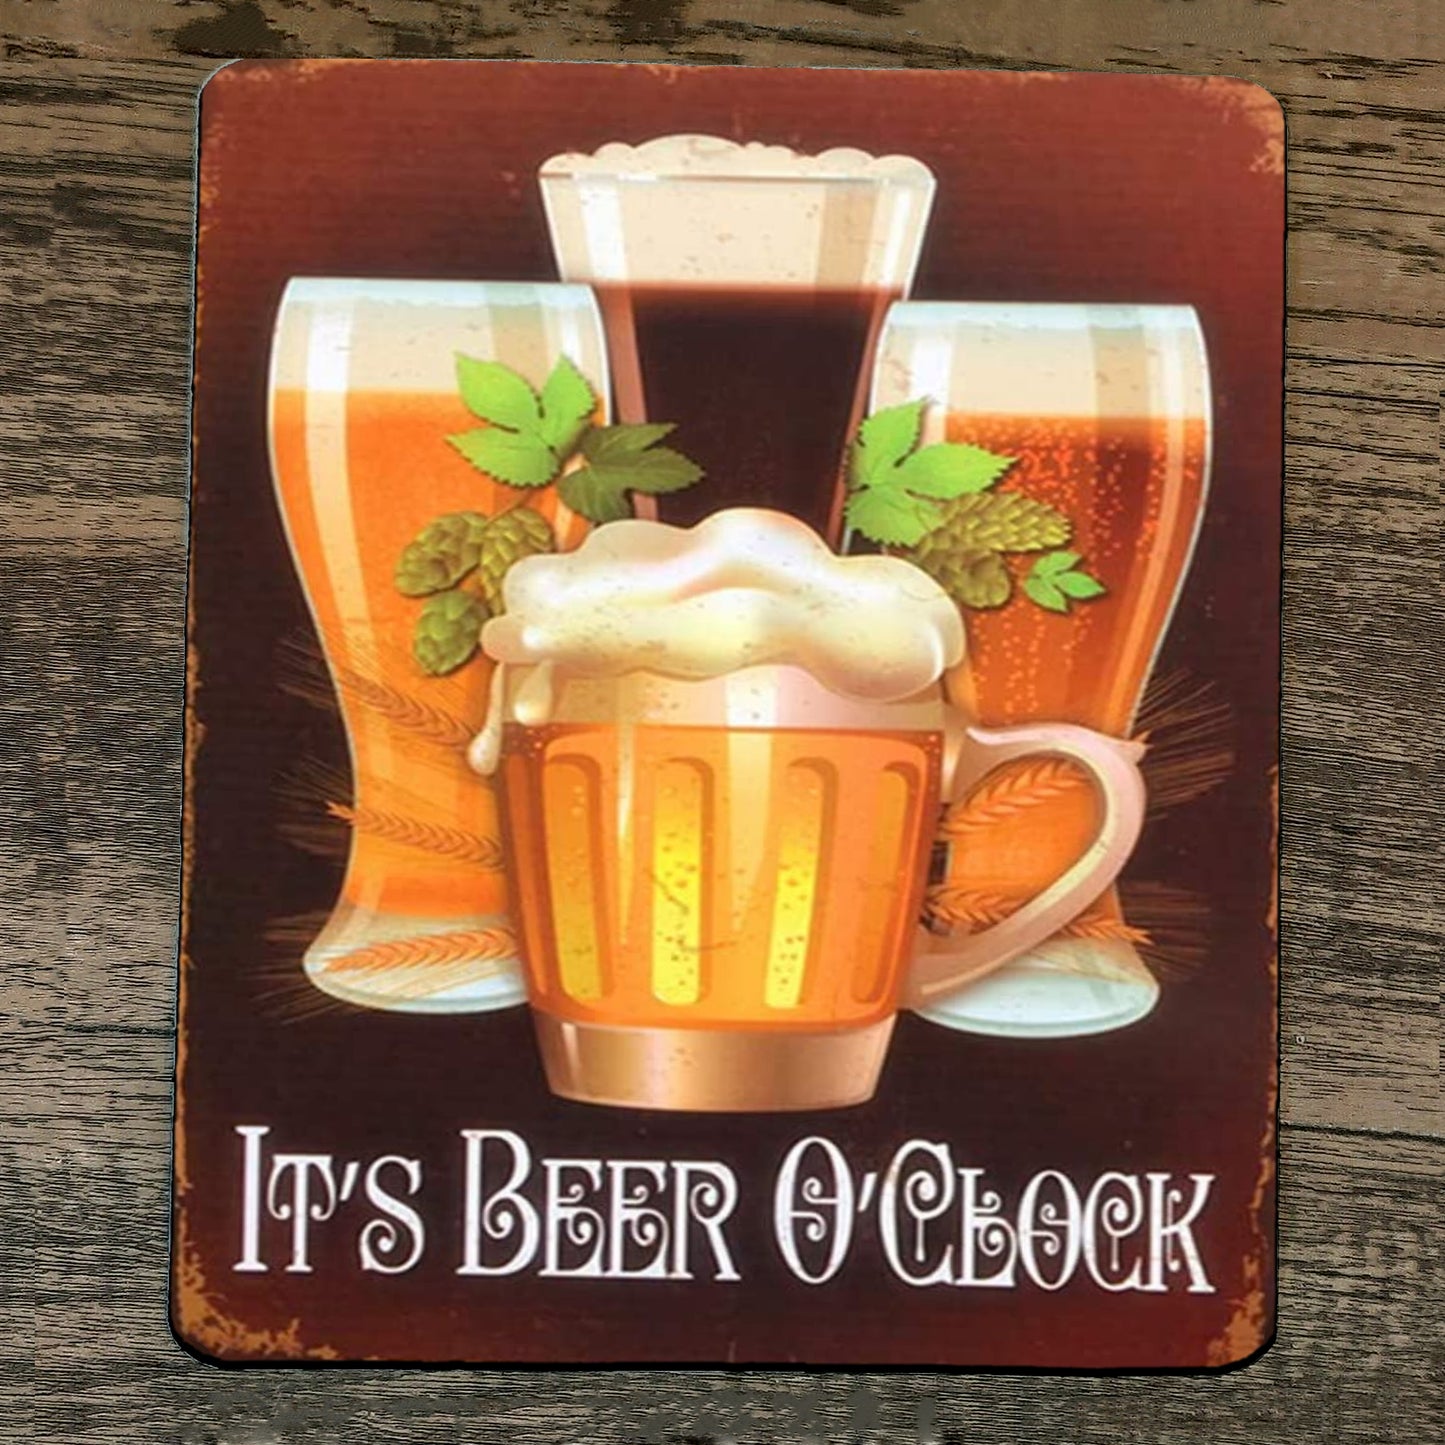 Bundle of Beers 5 Humorous 8x12 Metal Wall Bar Signs and Mouse Pad #2